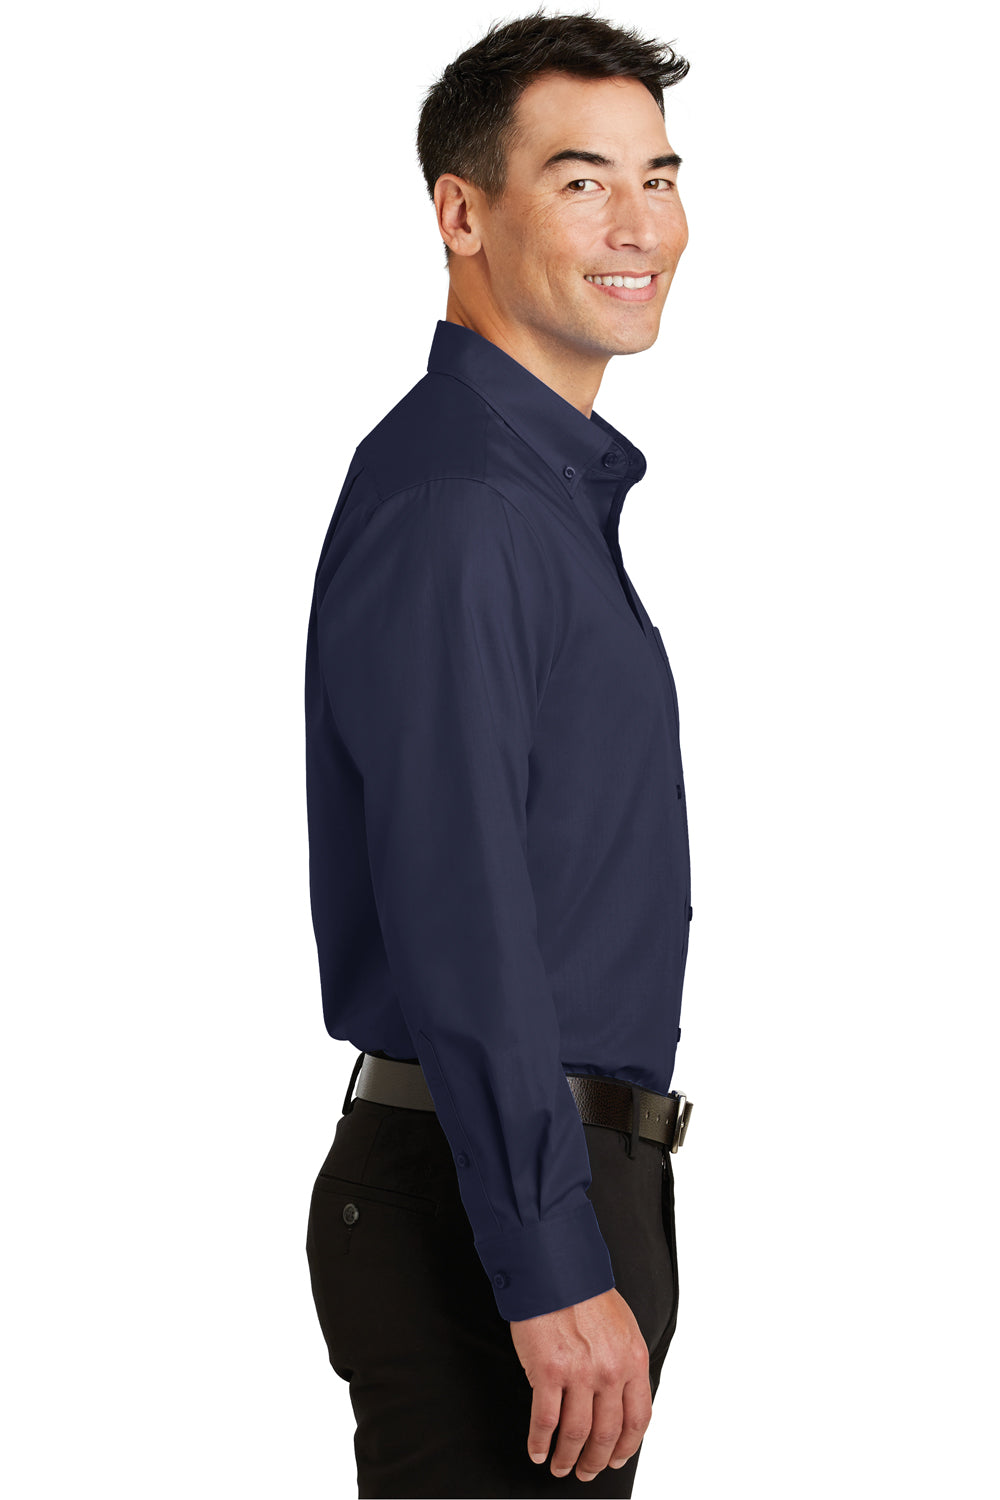 Port Authority S663 Mens SuperPro Wrinkle Resistant Long Sleeve Button Down Shirt w/ Pocket Navy Blue Side